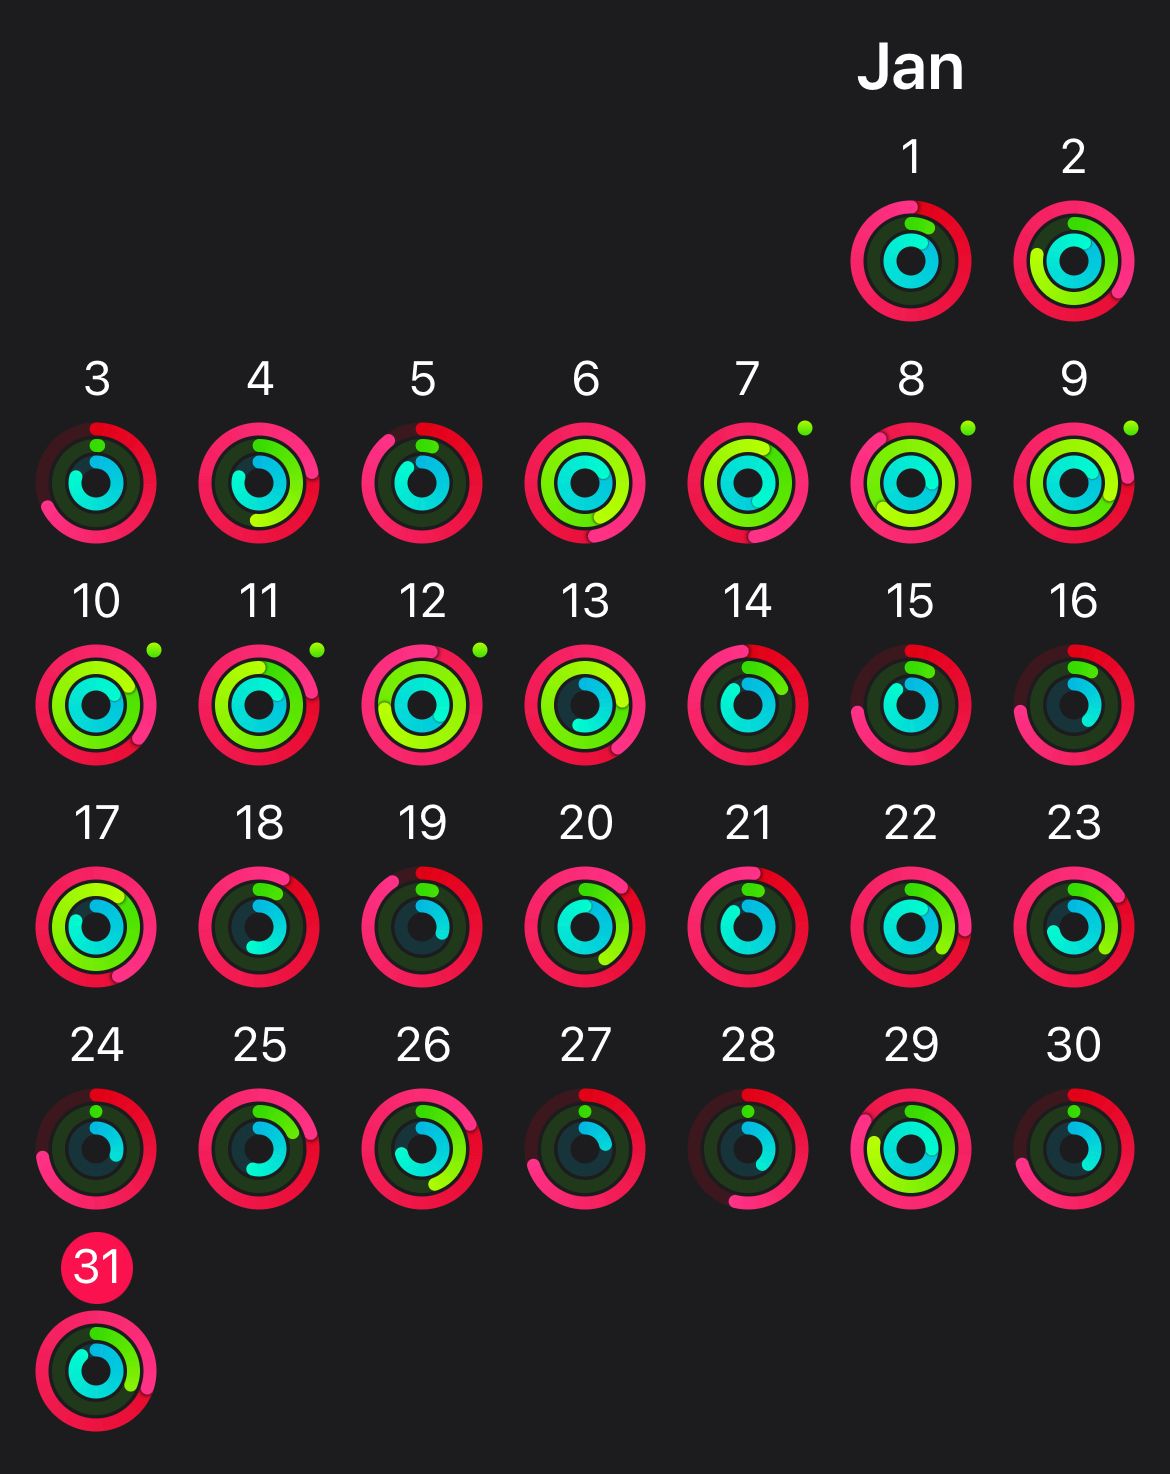 Apple Watch activity challenges are controlling me